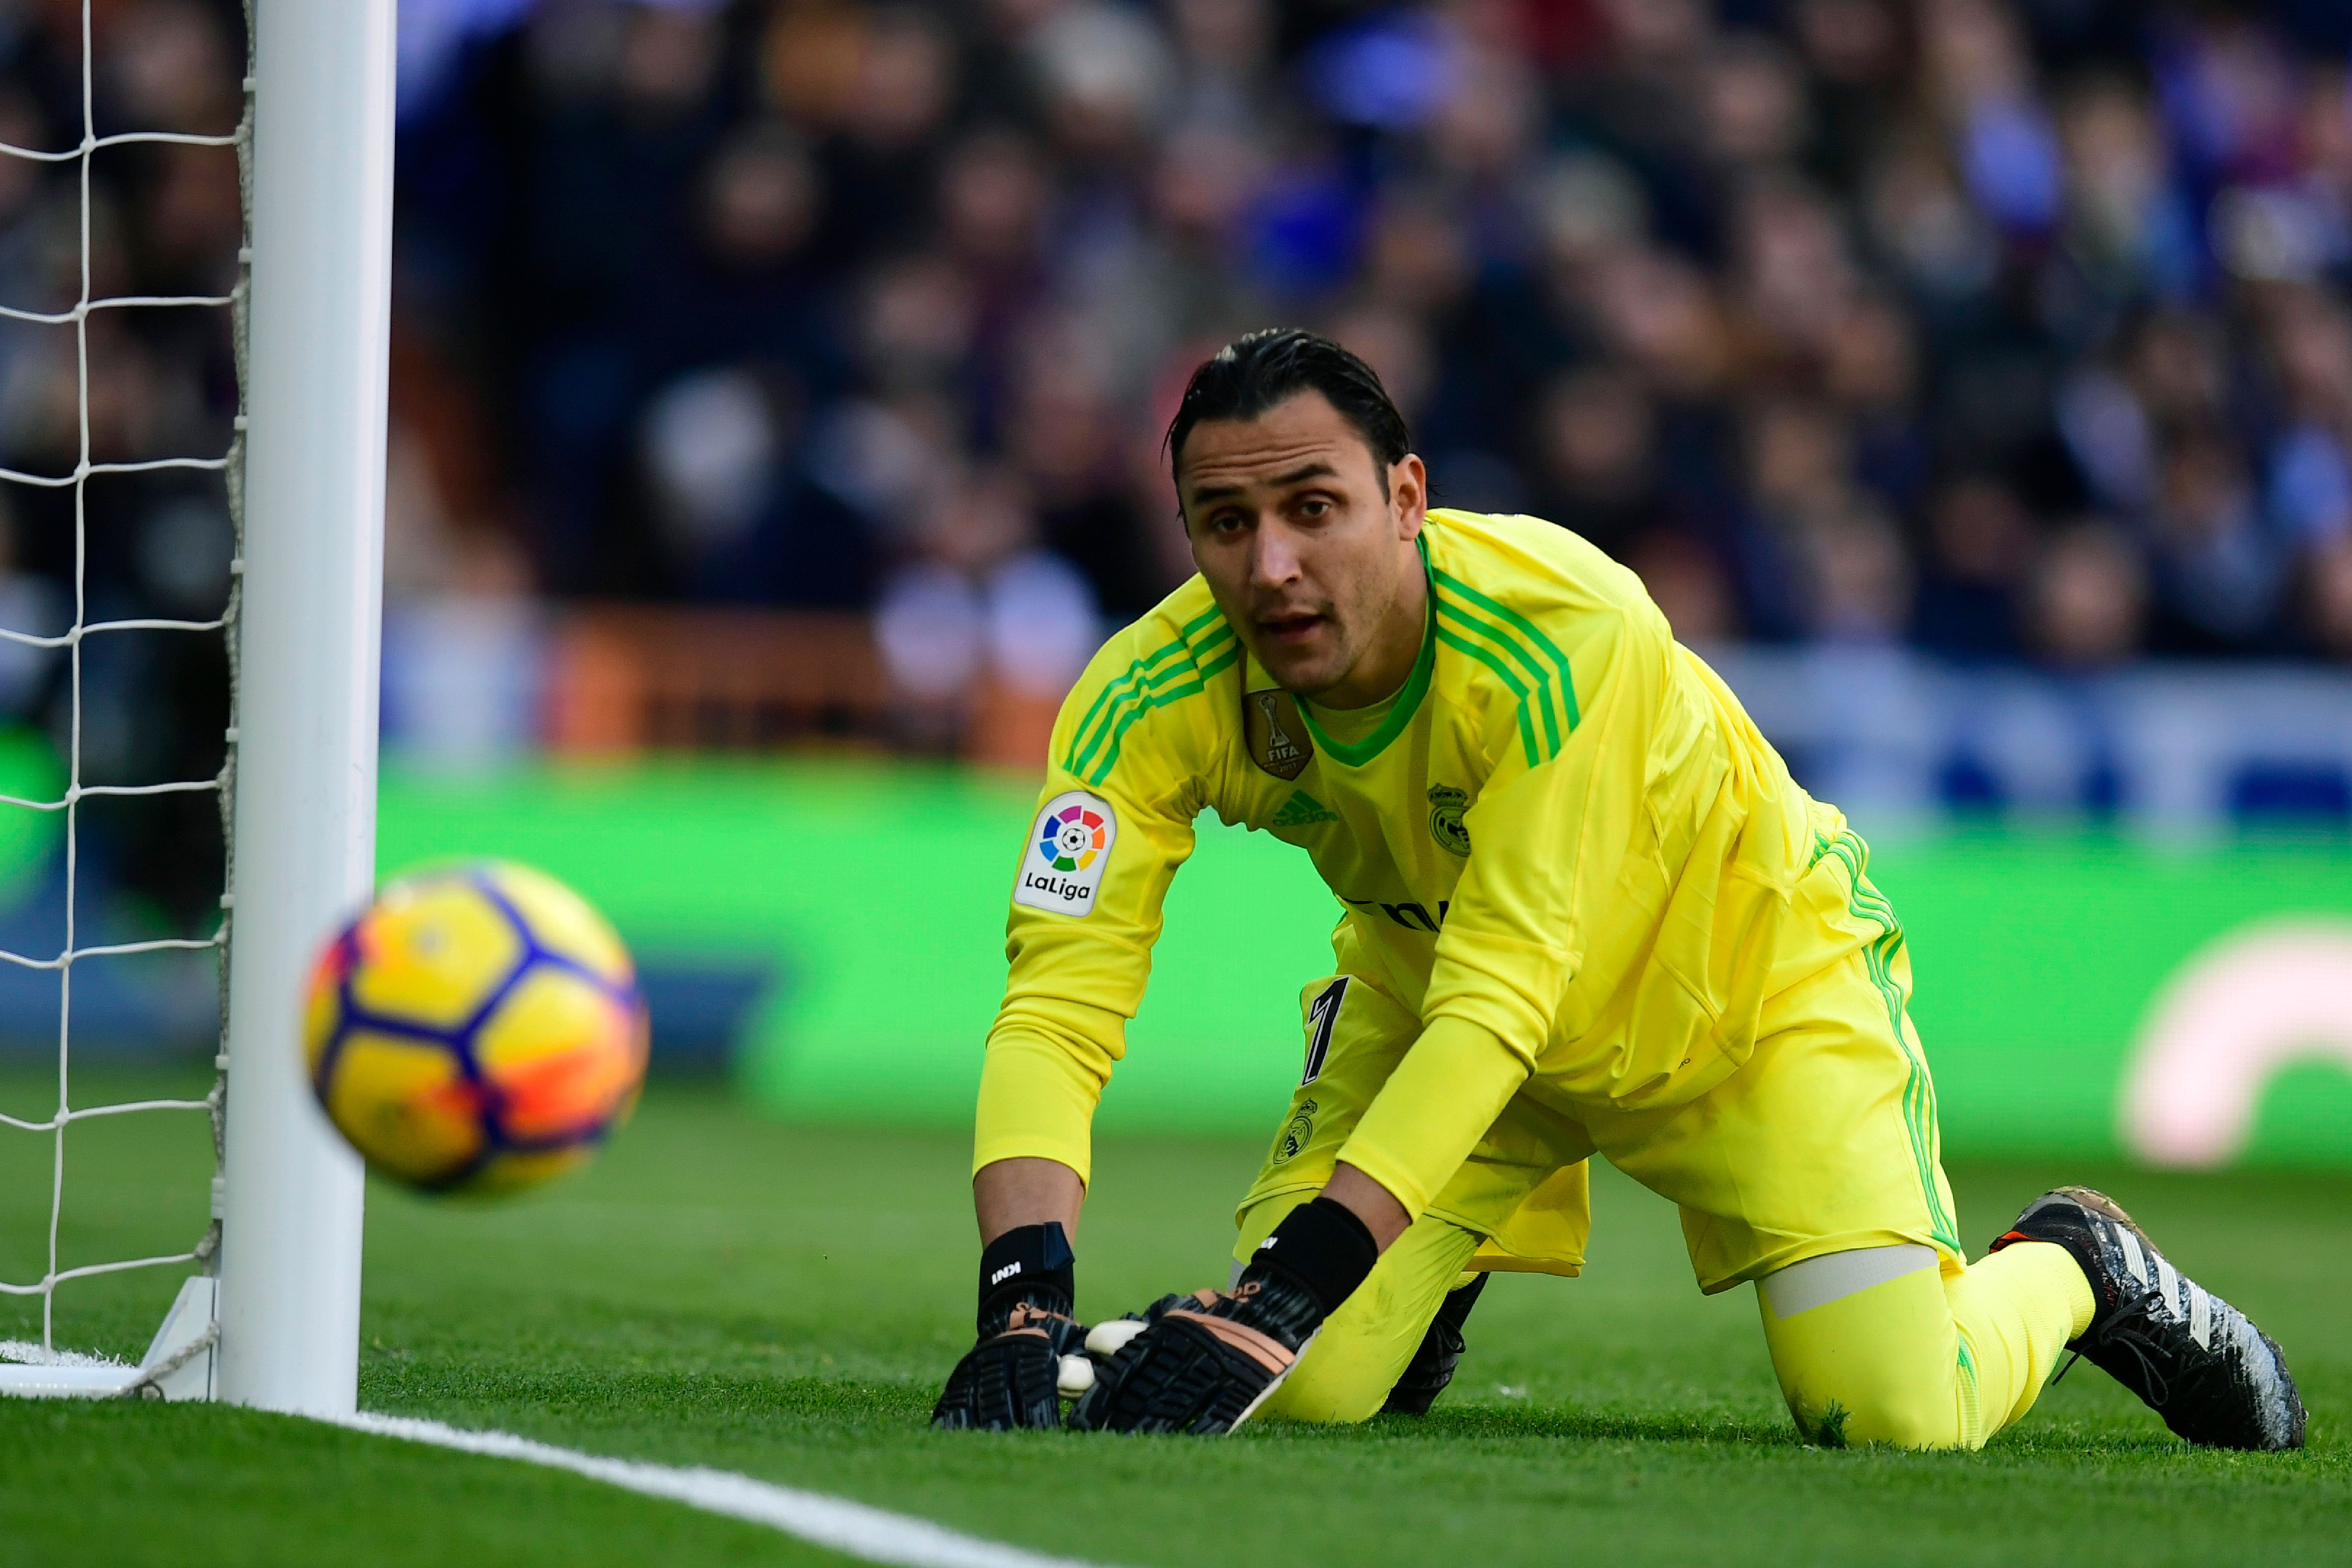 Real Madrid's Costa Rican goalkeeper Keylor Navas eyes the ball during the Spanish League "Clasico" football match Real Madrid CF vs FC Barcelona at the Santiago Bernabeu stadium in Madrid on December 23, 2017.  / AFP PHOTO / JAVIER SORIANO        (Photo credit should read JAVIER SORIANO/AFP/Getty Images)